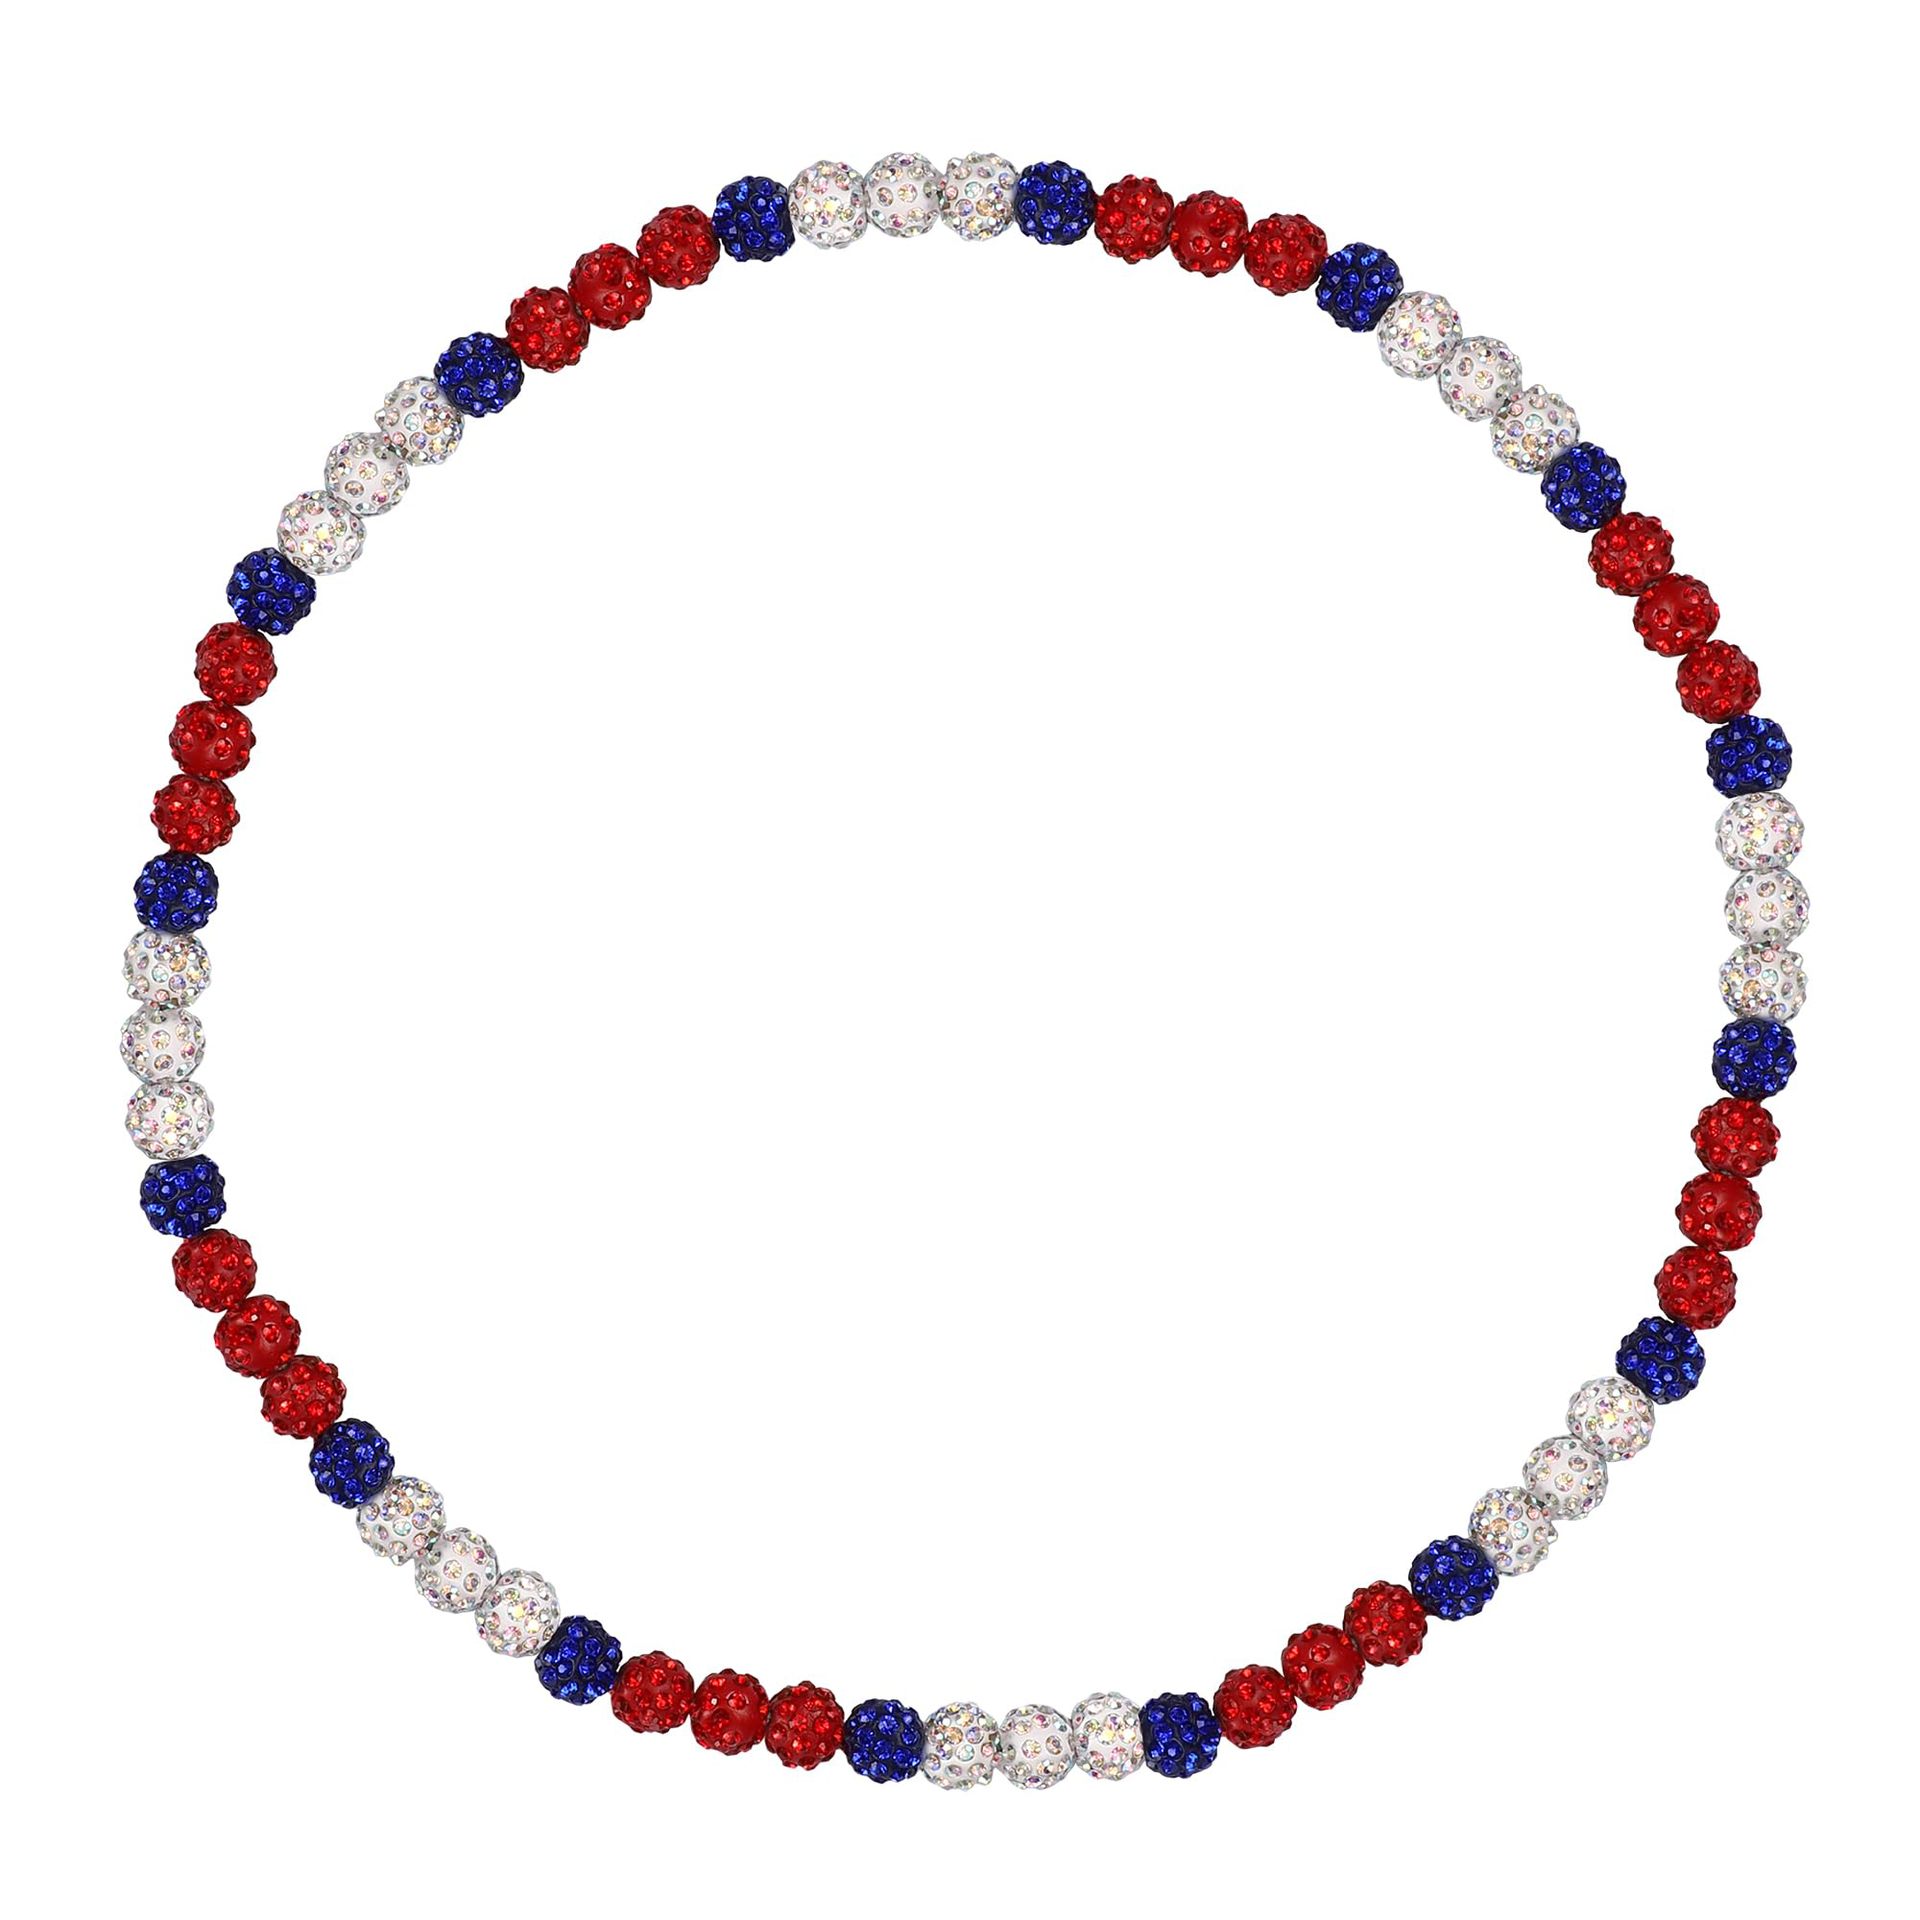 8mm red, white and blue diamond